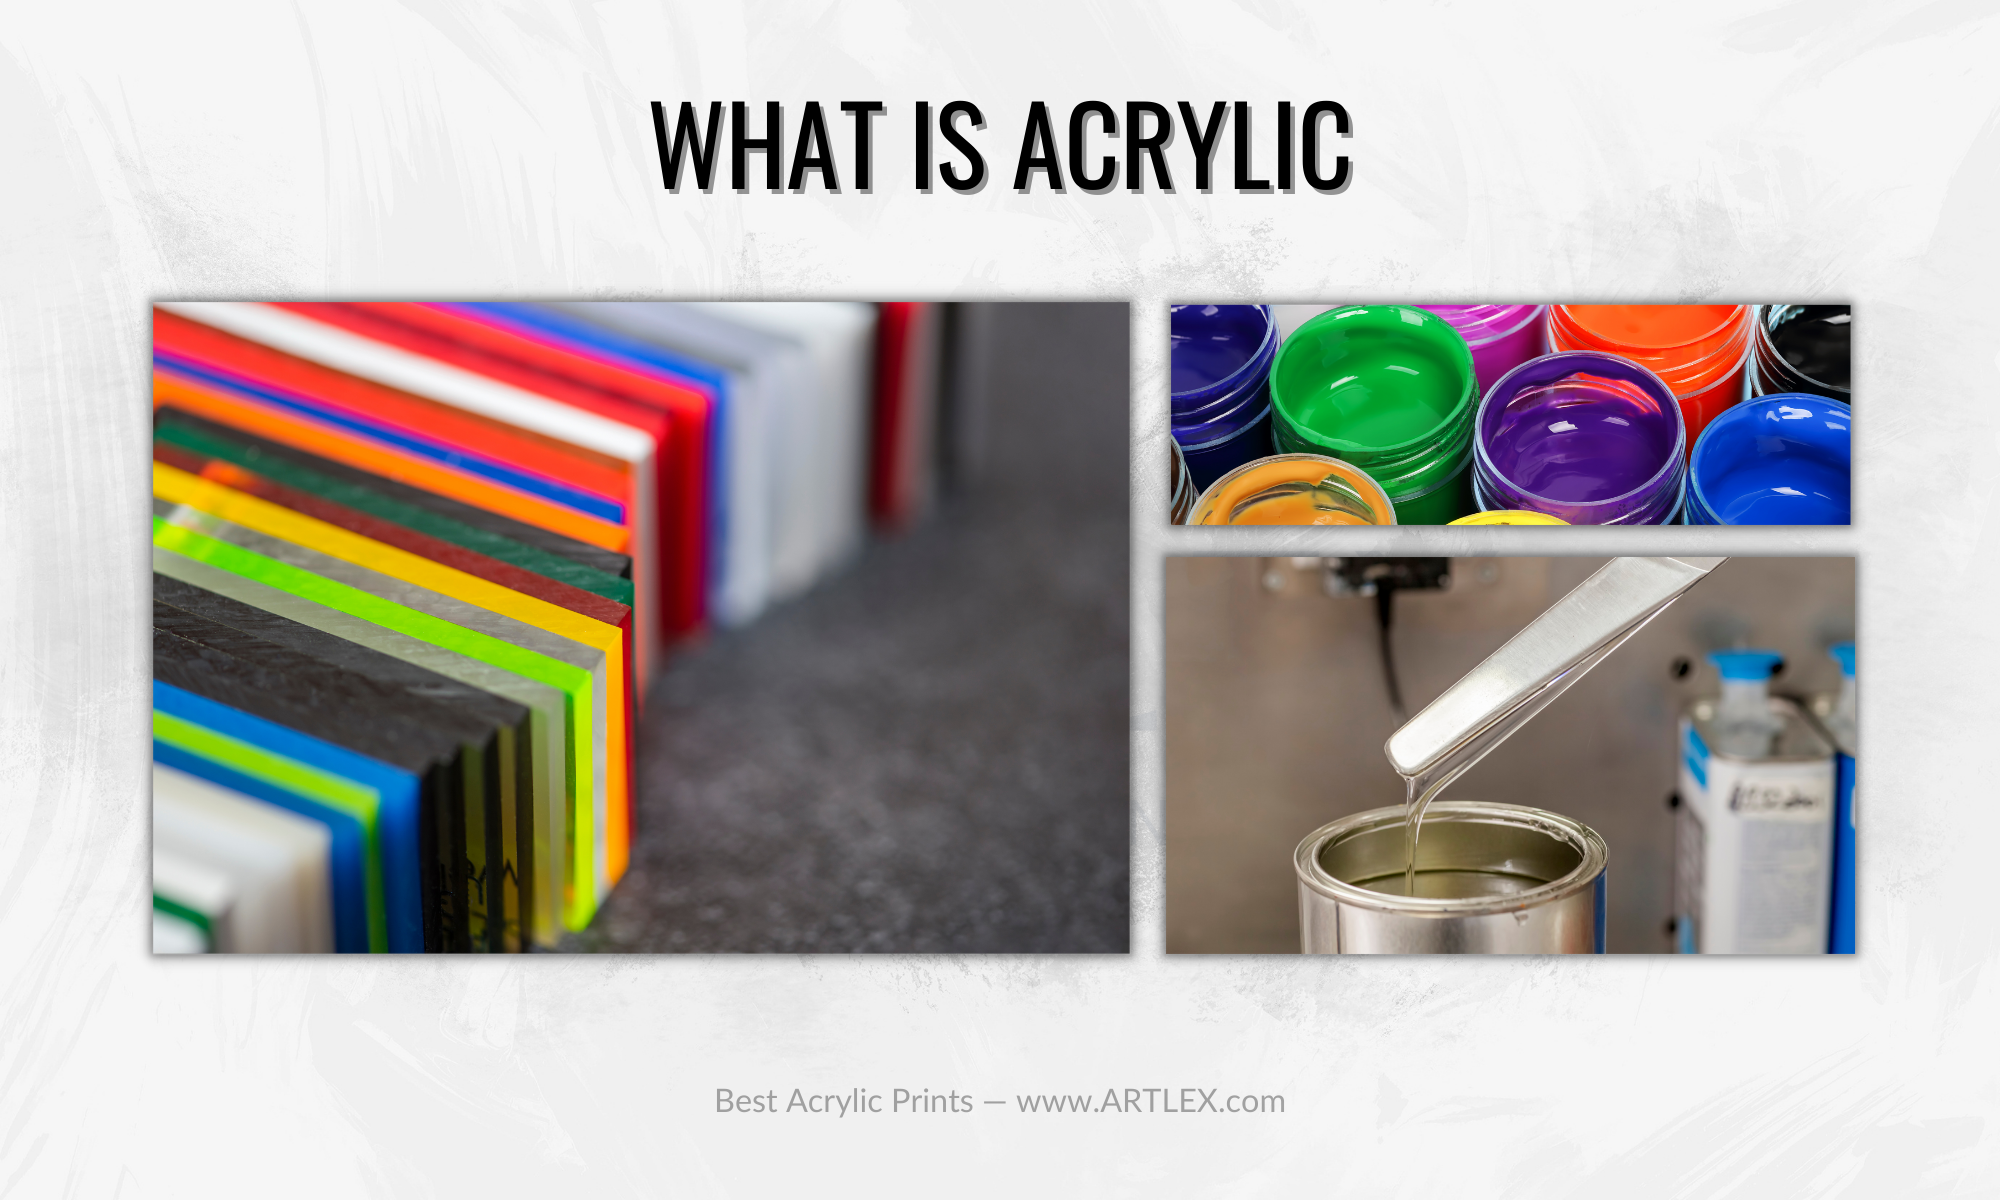 What is Acrylic